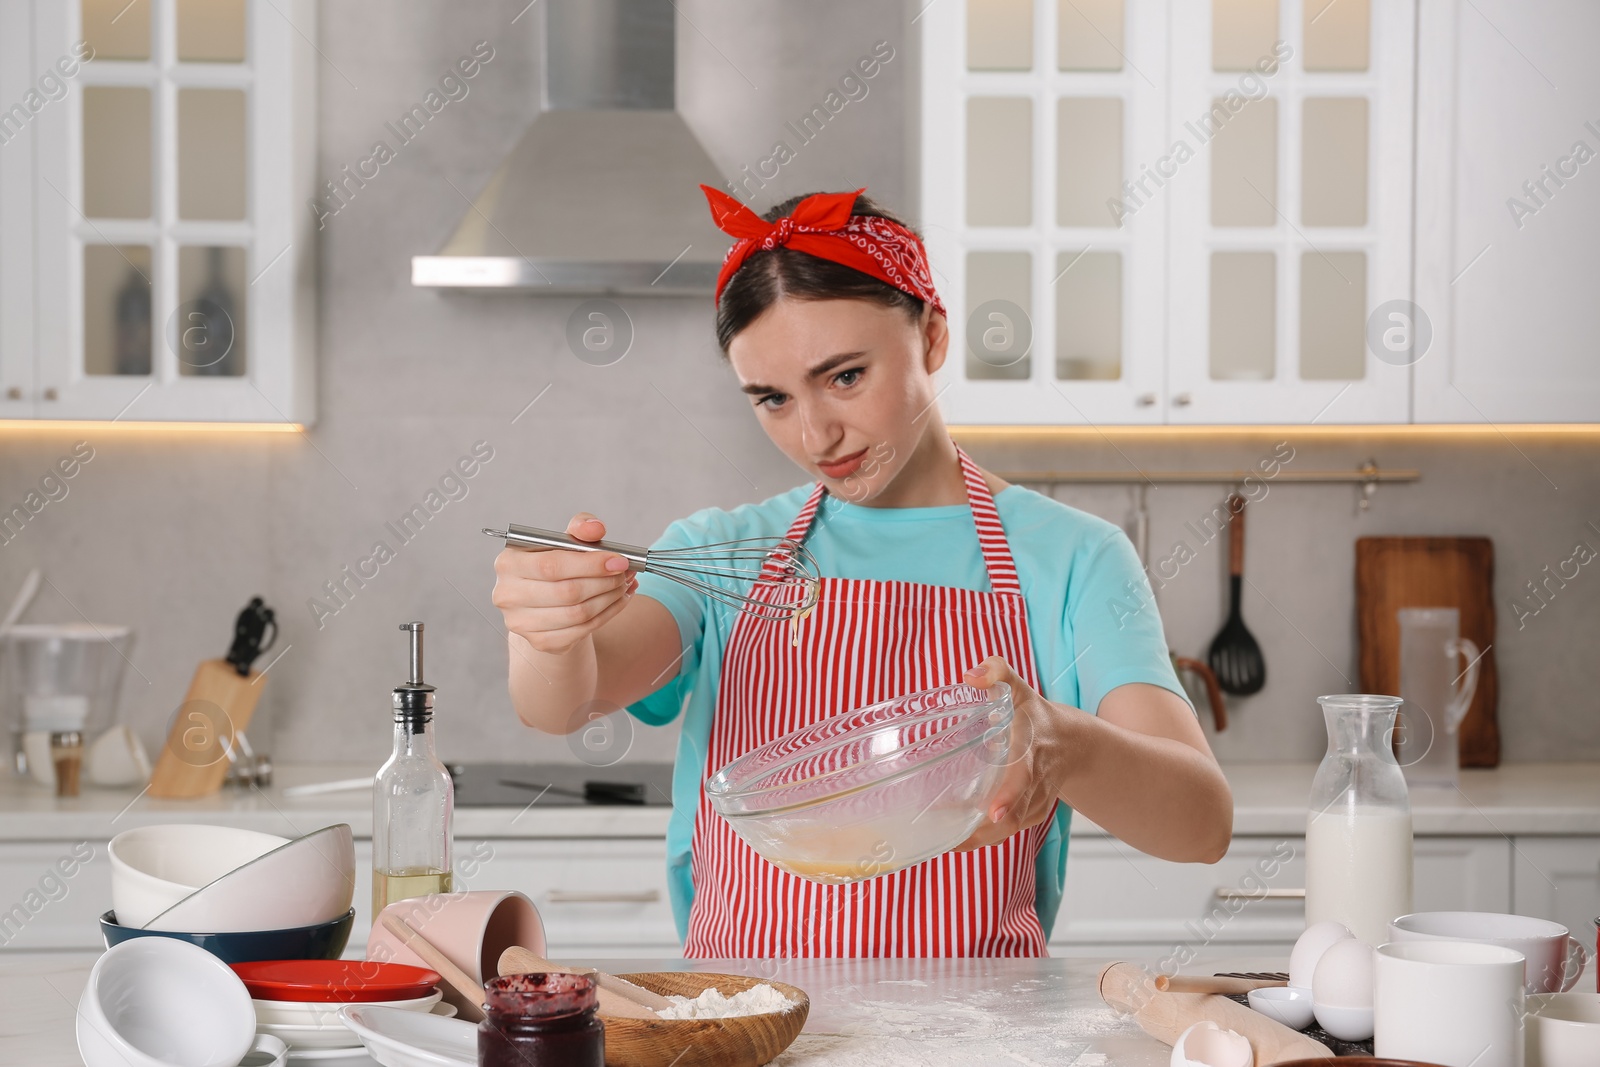 Photo of Beautiful woman cooking in messy kitchen. Many dishware, utensils and scattered flour on countertop